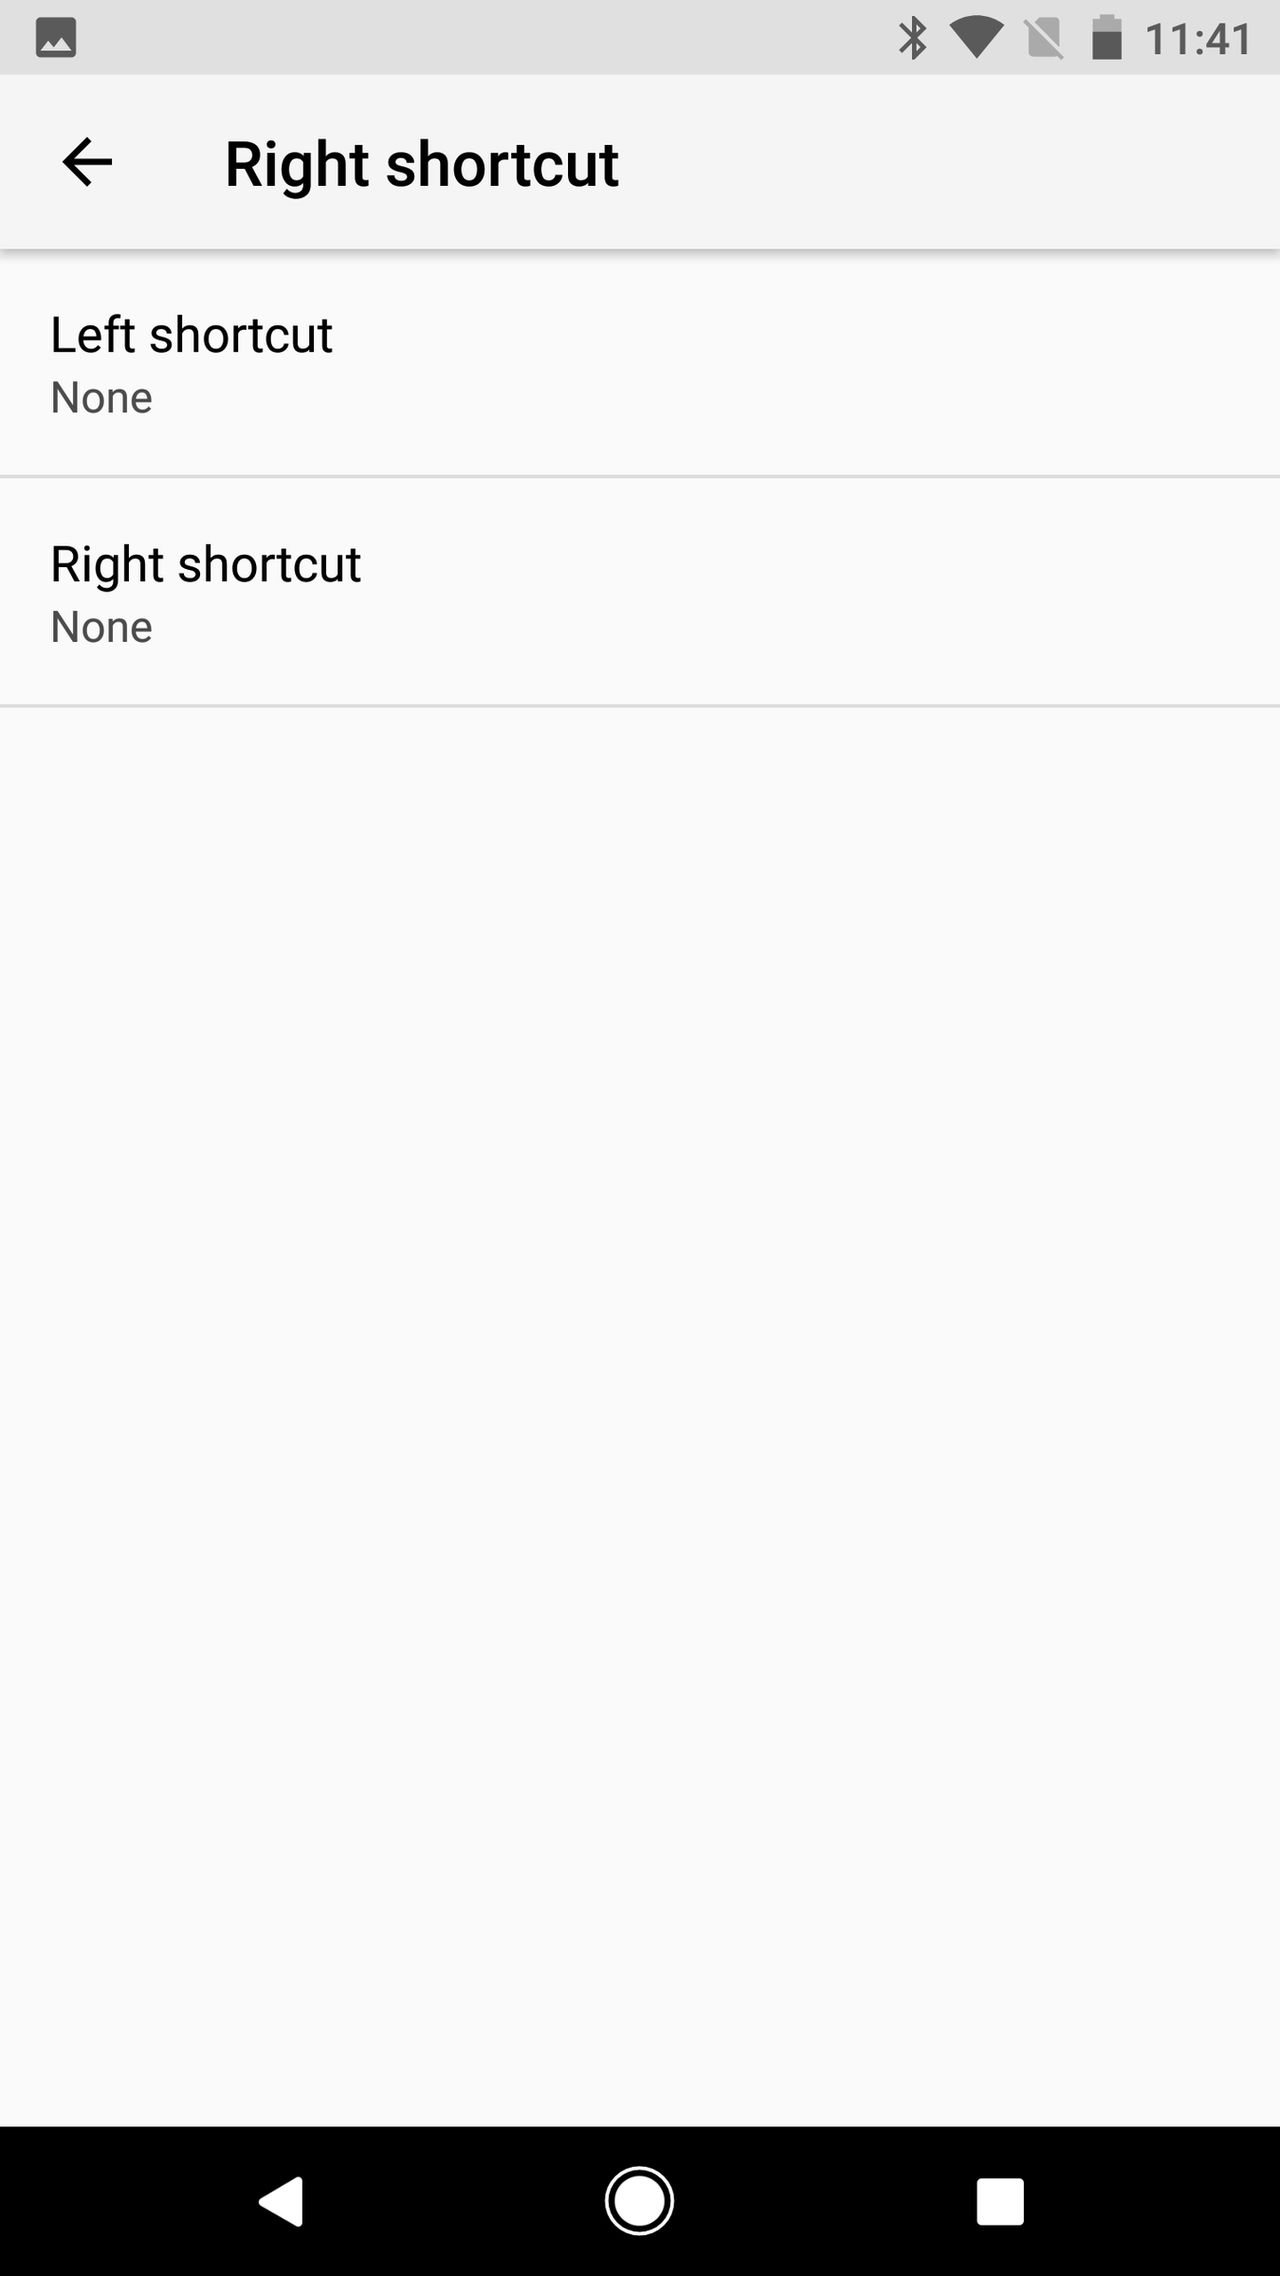 http://www.androidpolice.com/2017/03/21/android-o-feature-spotlight-custom-shortcuts-can-now-added-lockscreen-via-system-ui-tuner/